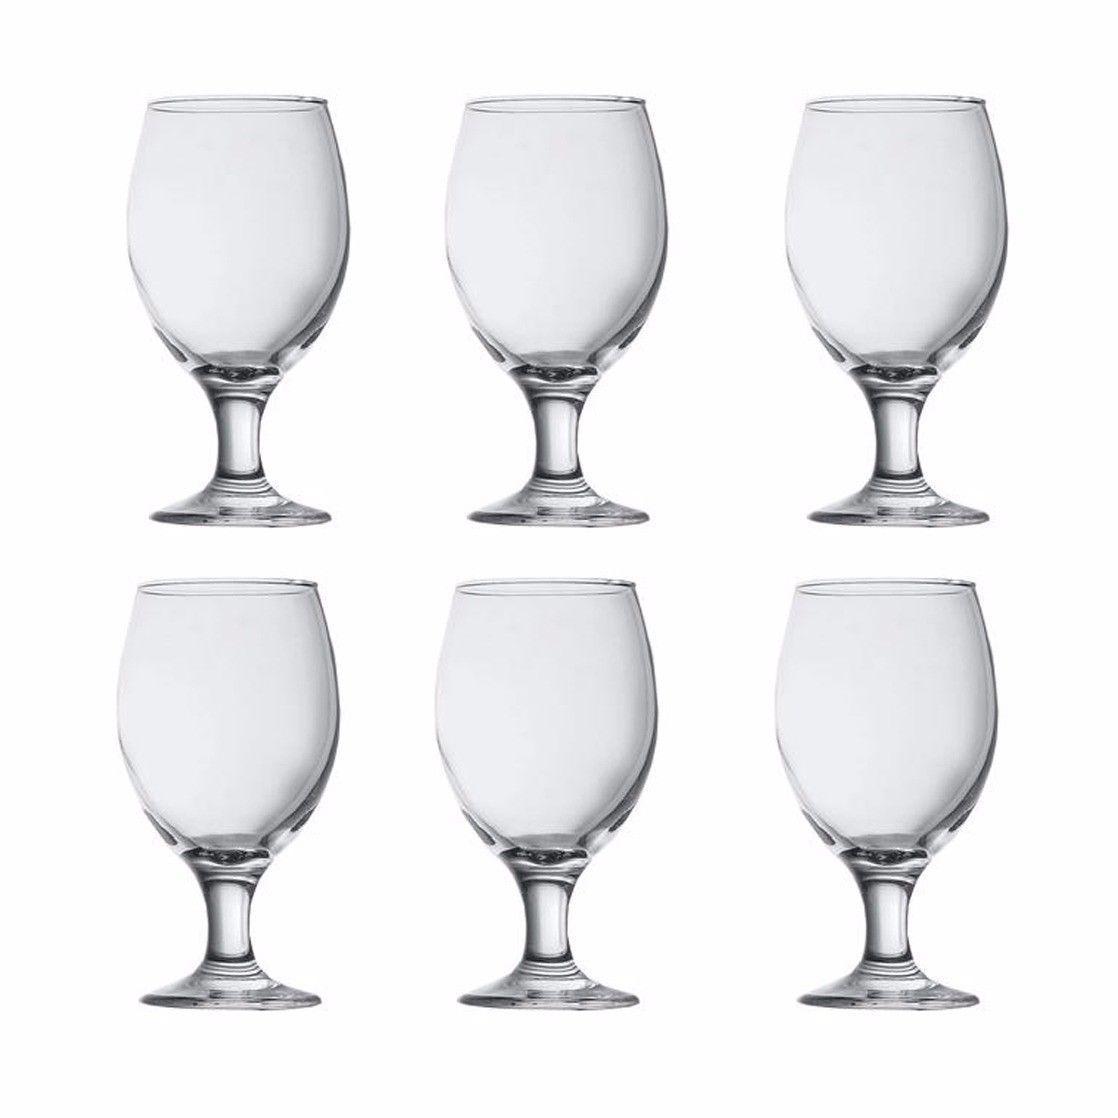 6 Pack of clear glass beer glass, drinking glass fancy beer glass 400ml 44417  9224 (Parcel Rate)